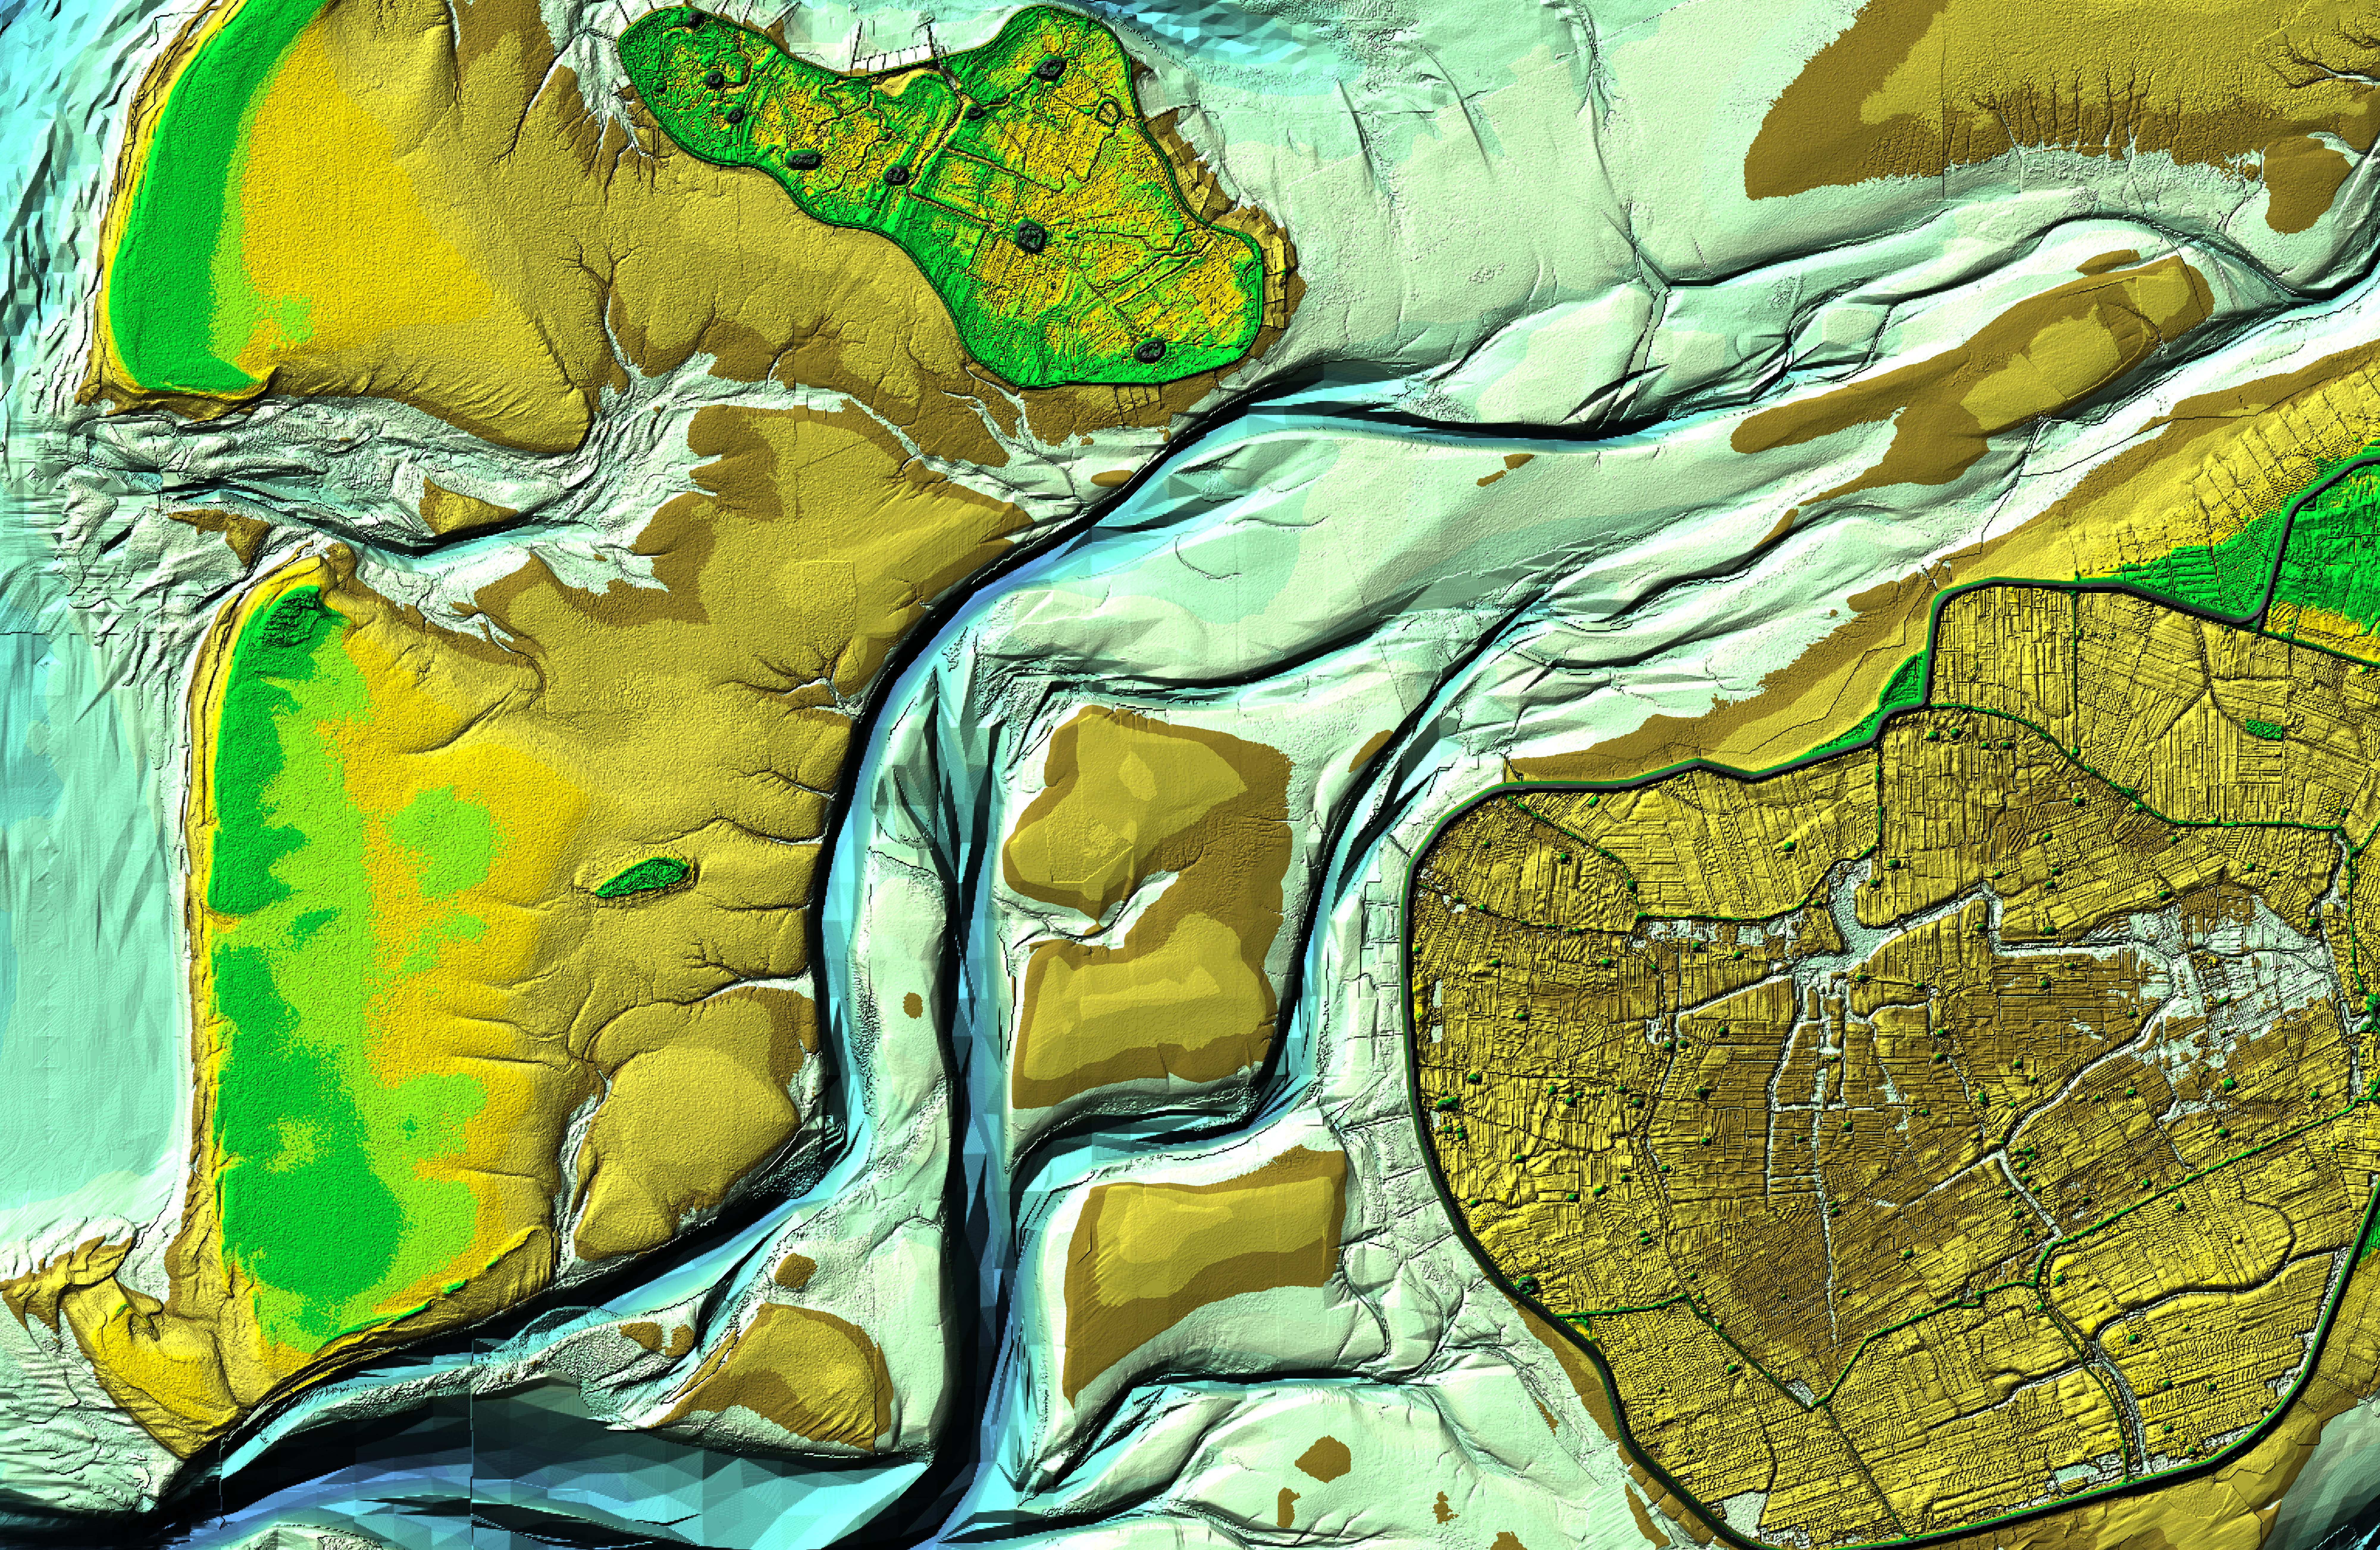 Bathymetry from Pellworm (detailed - shaded)